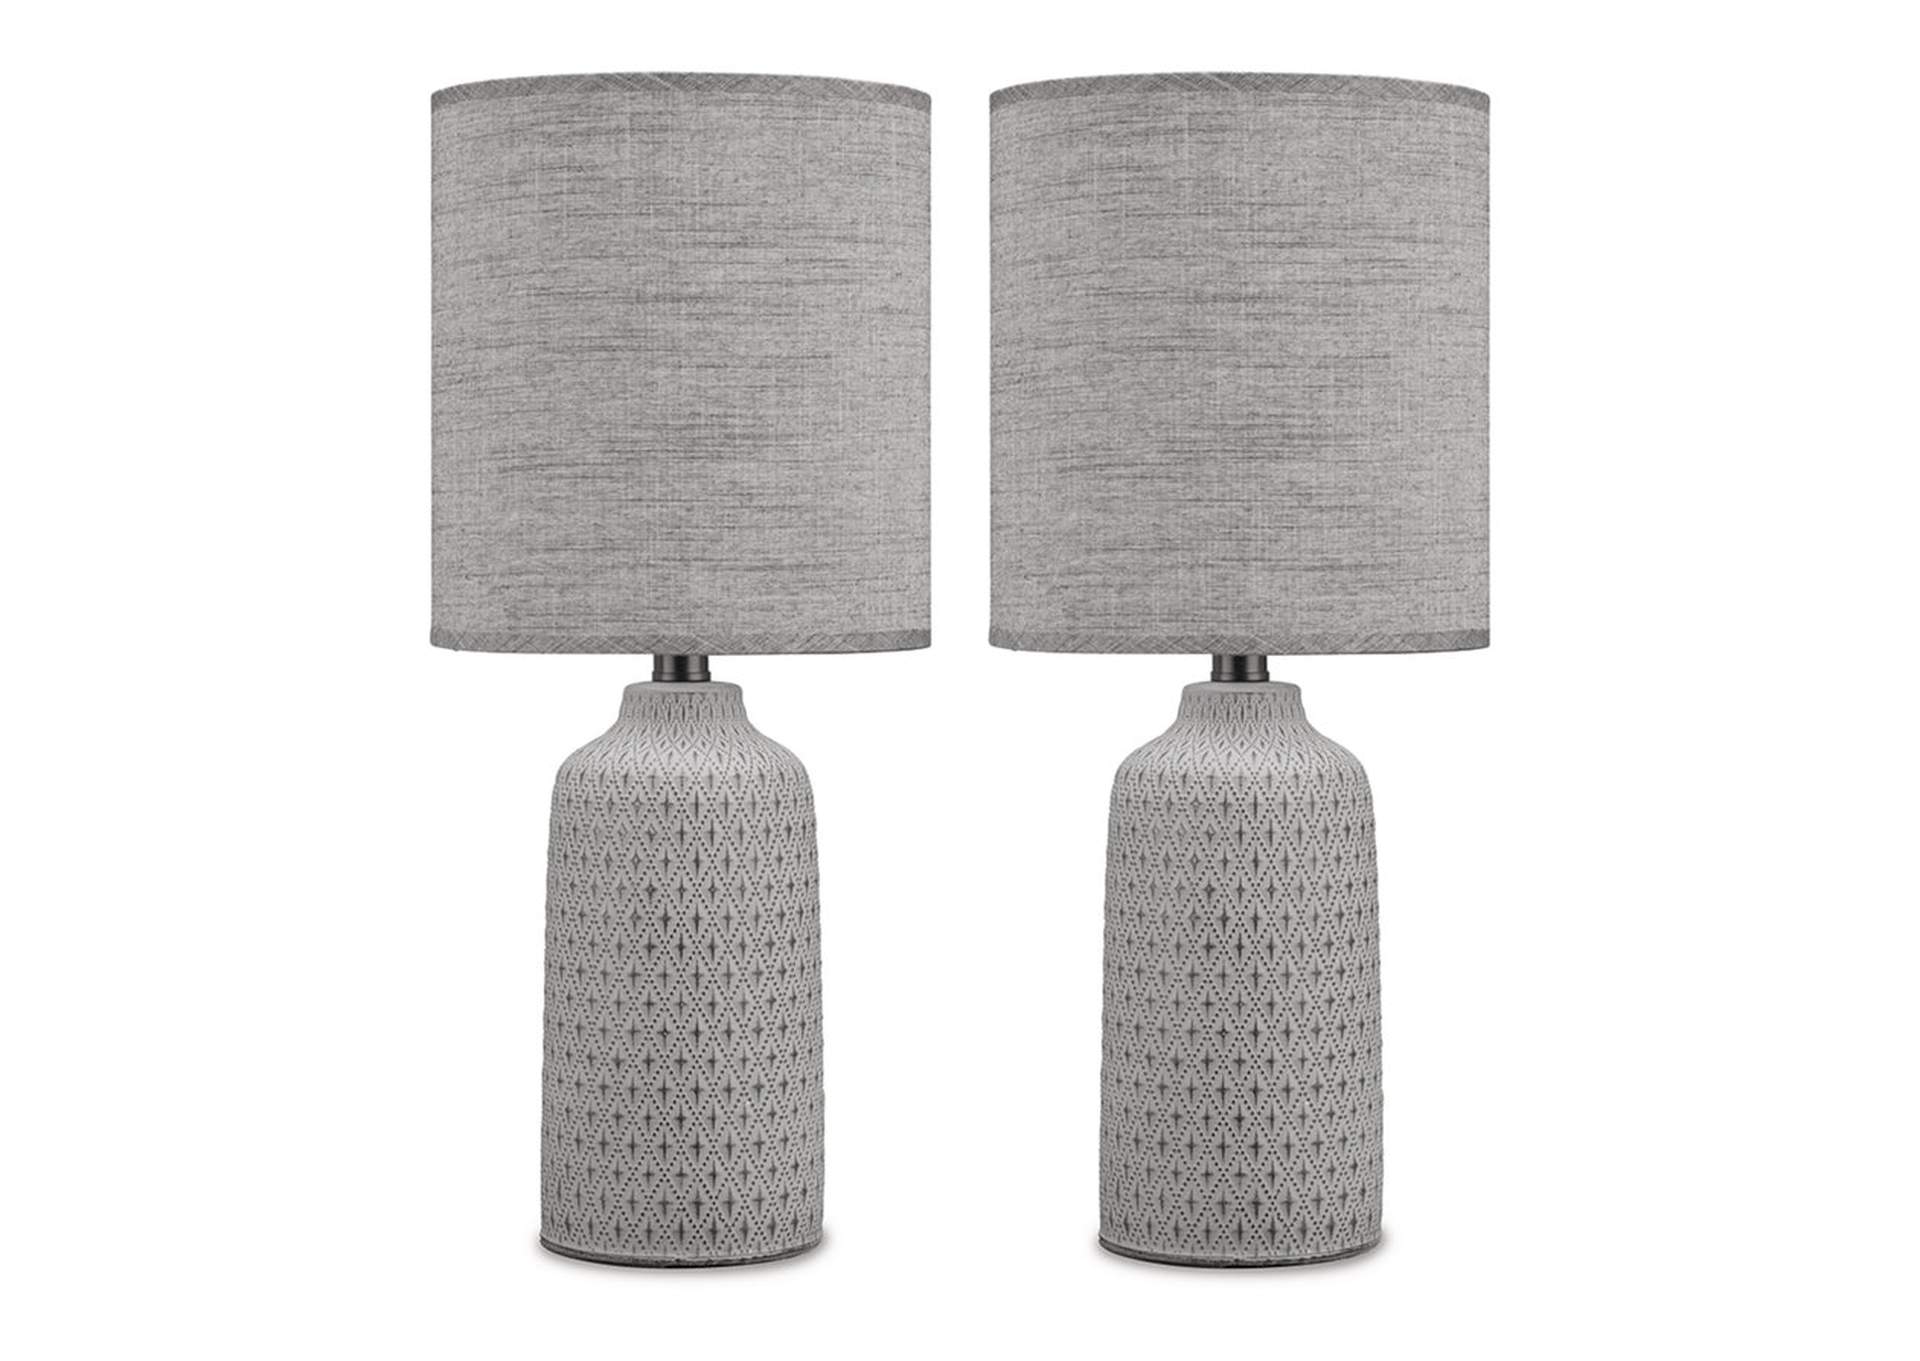 Donnford 2-Piece Table Lamp Set,Signature Design By Ashley